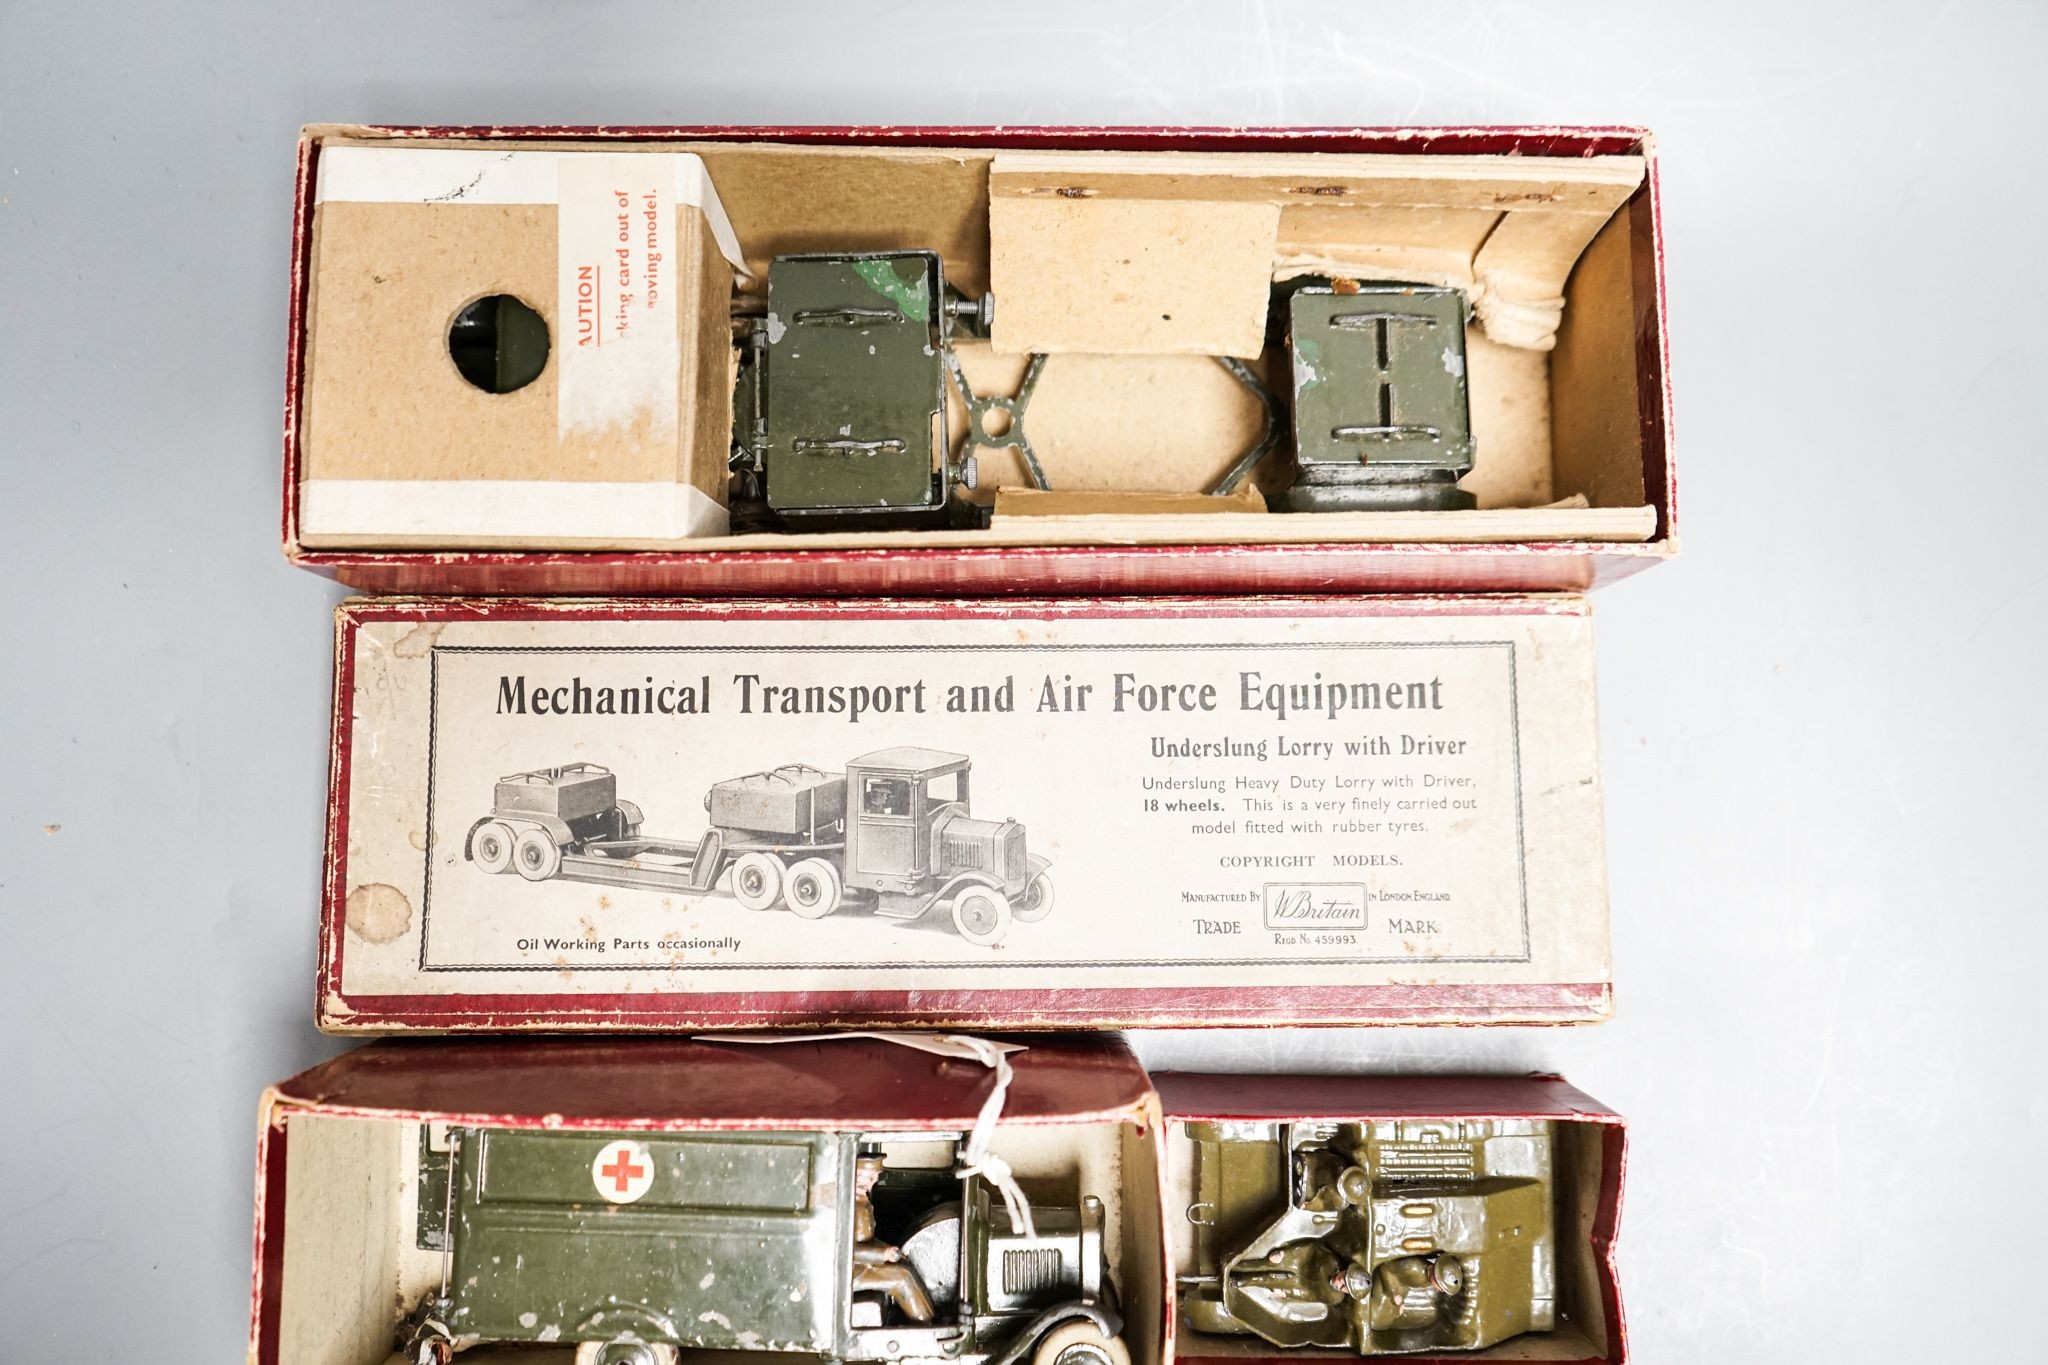 Britain's 1641 Mechanical Transport and Air Force Equipment 1512 Khaki Army Ambulance and 1876 Bren Gun Carrier all in original boxes, pre-war